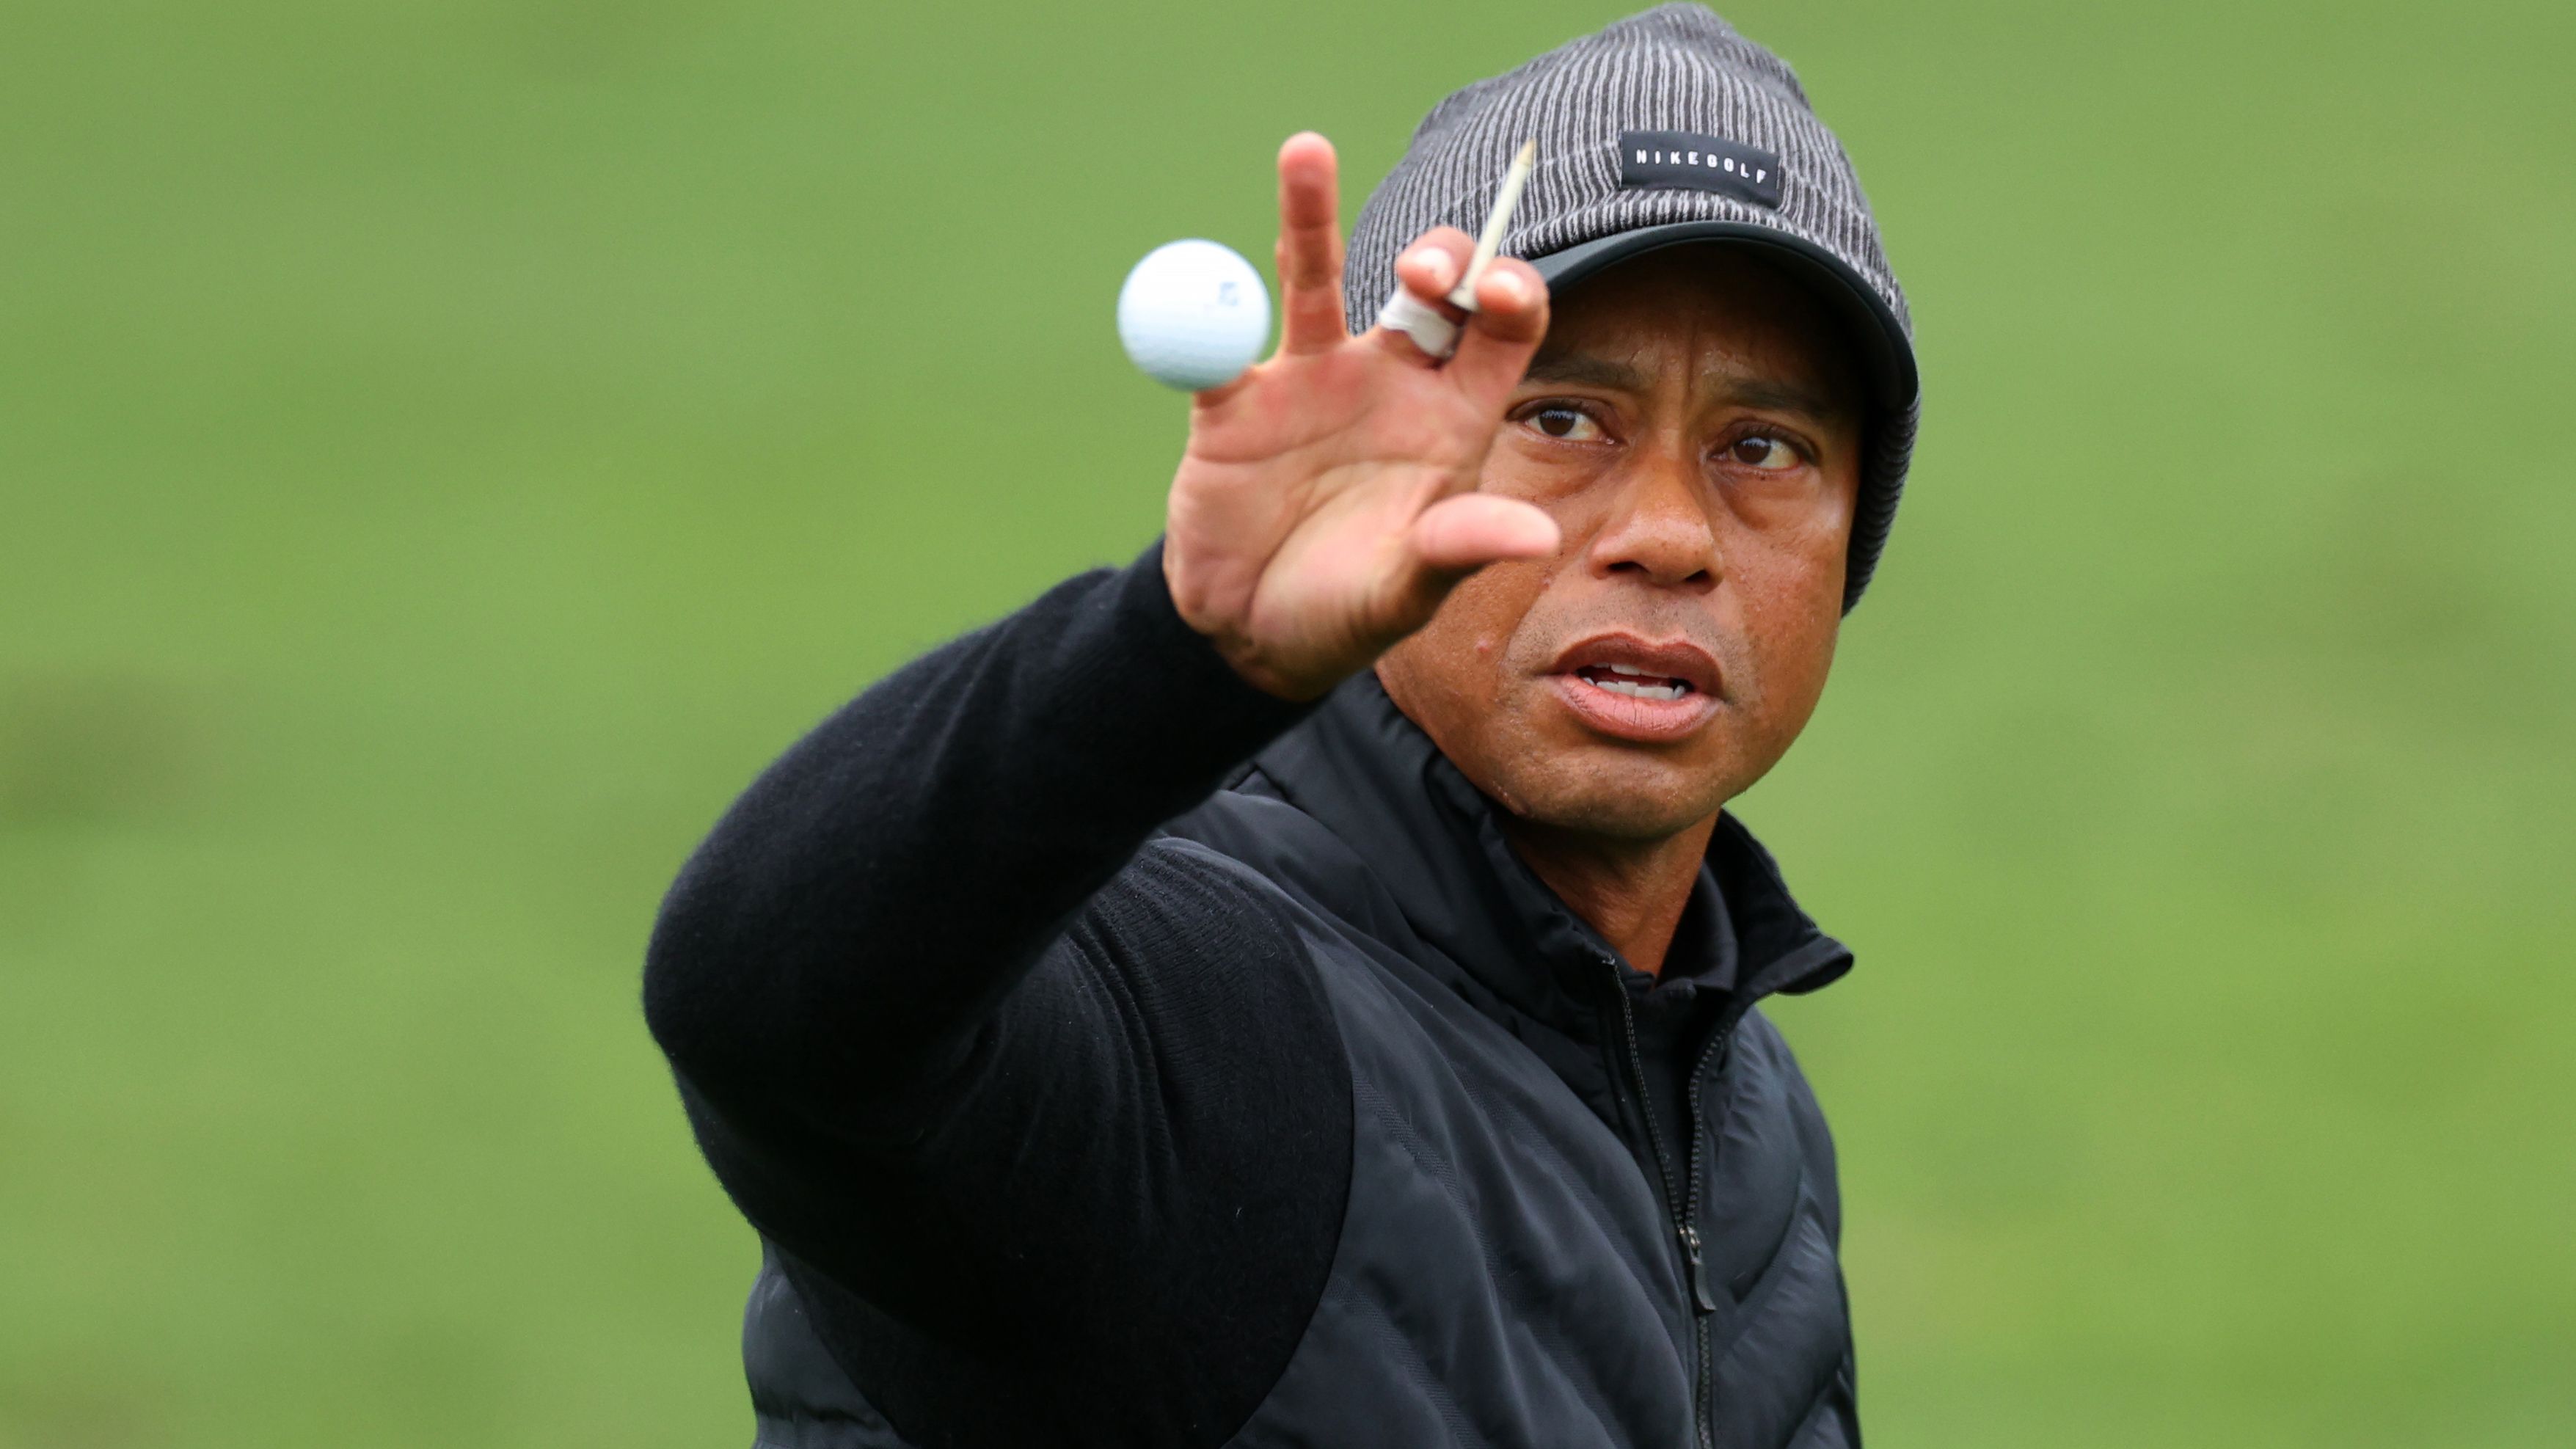 Helping hand allows Tiger Woods to tie Masters record despite struggles